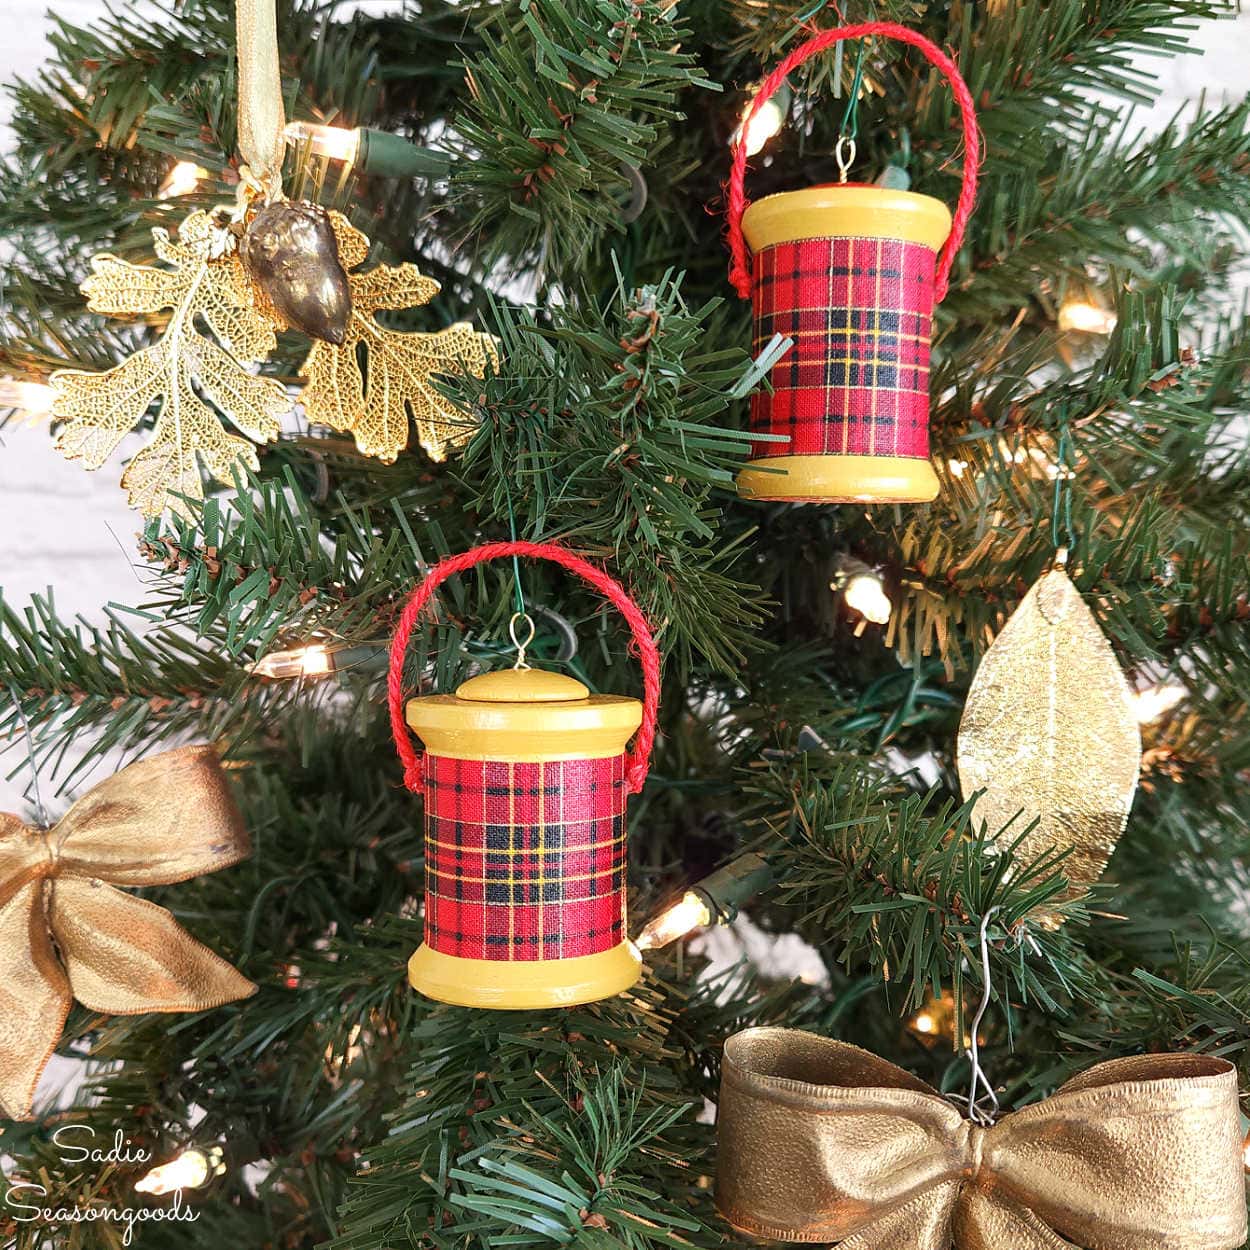 Plaid Cooler Ornament from a Wooden Spool